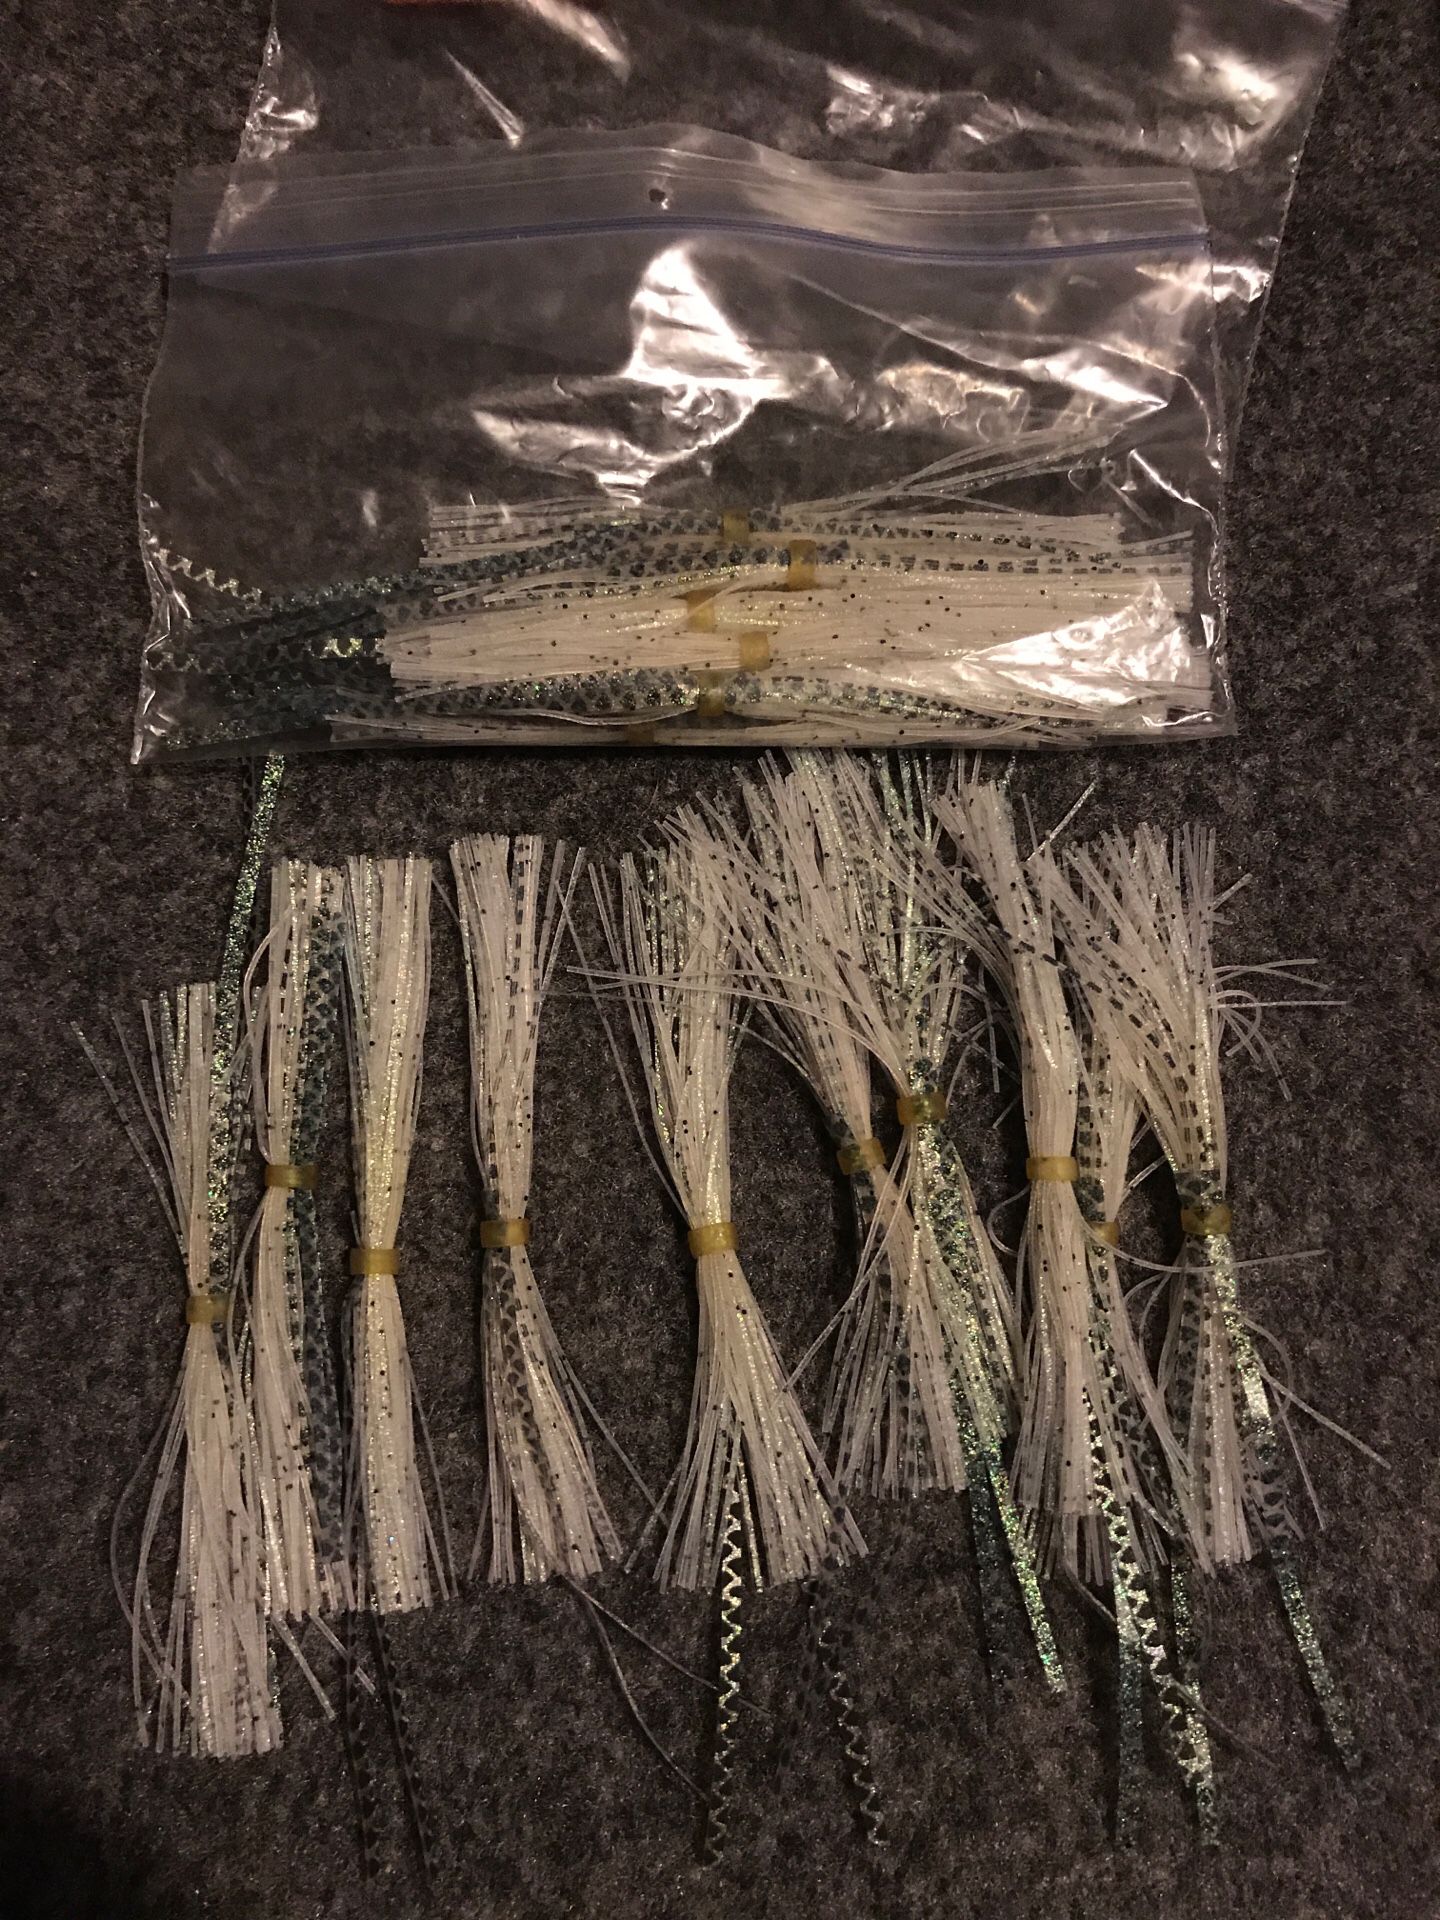 20 SWCTACKLE Green Back Shad Skirts for Spinnerbaits or jigs. Bass Fishing